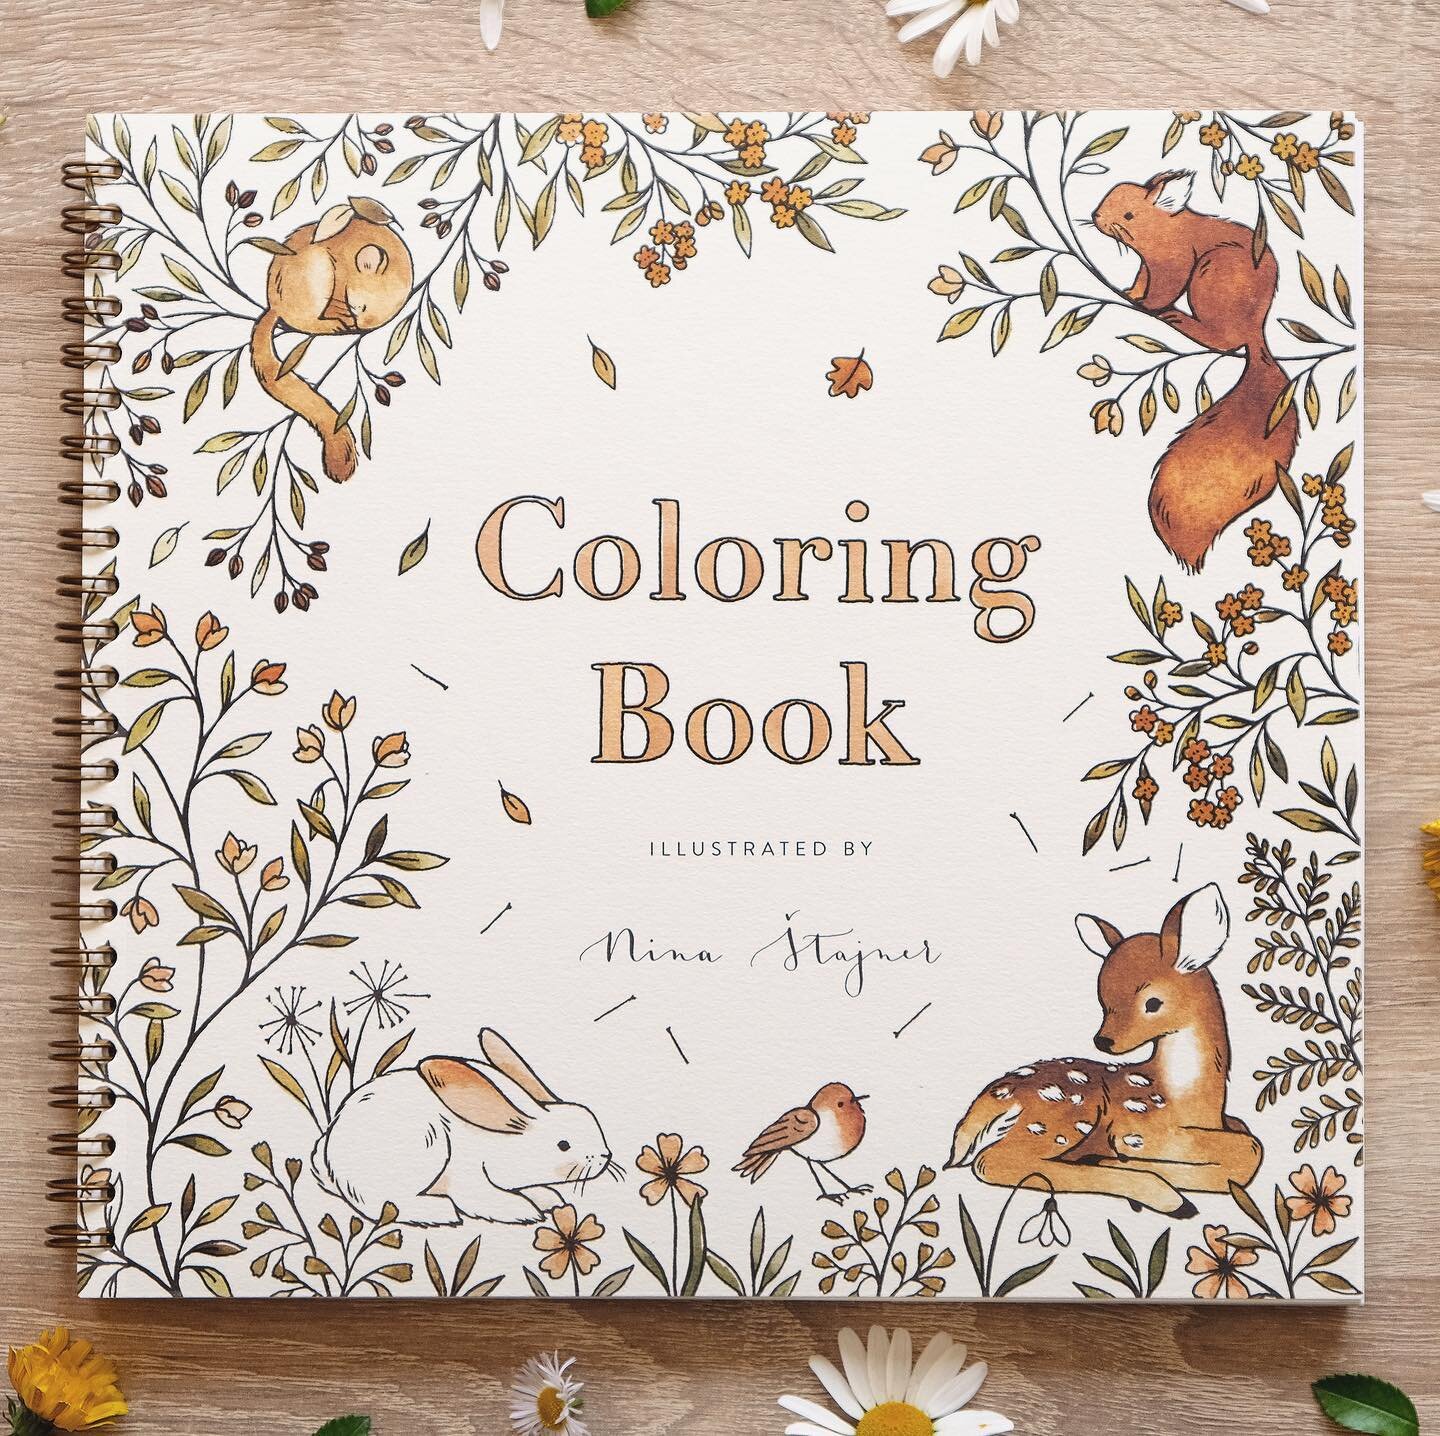 🍂While I was moving to another home &amp; studio I found a few more pieces of new and old coloring books (like less then 10 of each version). 🤎 So I&rsquo;ve also listed those in my Etsy shop, but they won&rsquo;t last I&rsquo;m afraid. 🐻But if yo